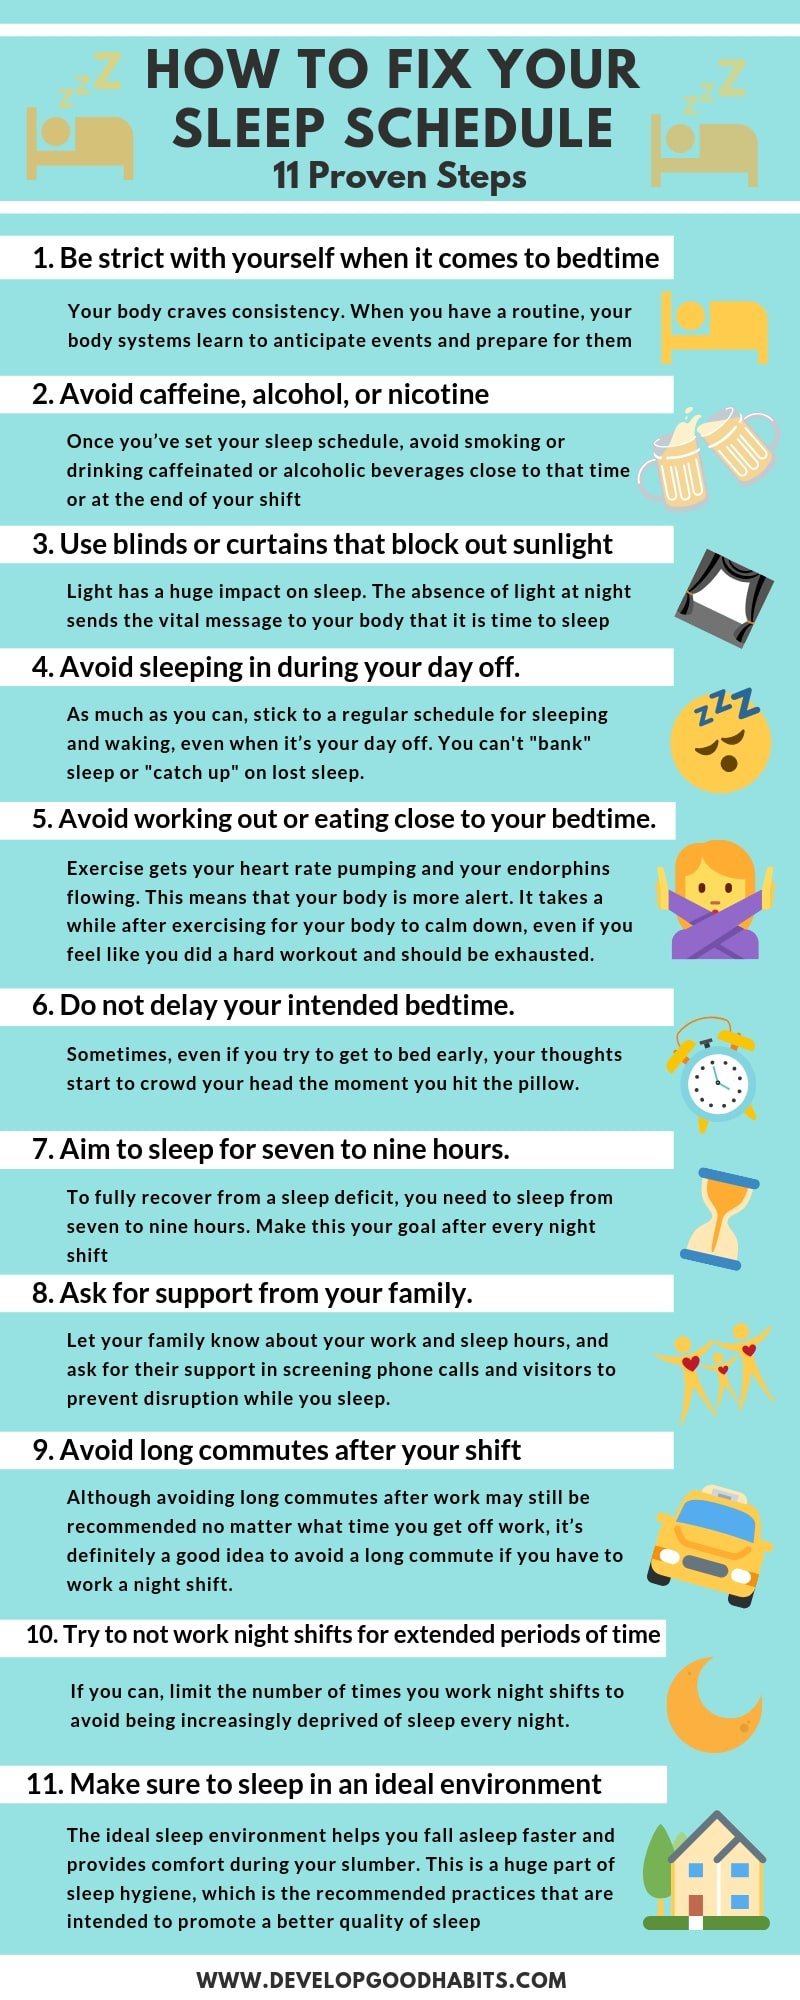 How to create a bedtime routine to support a sleep schedule